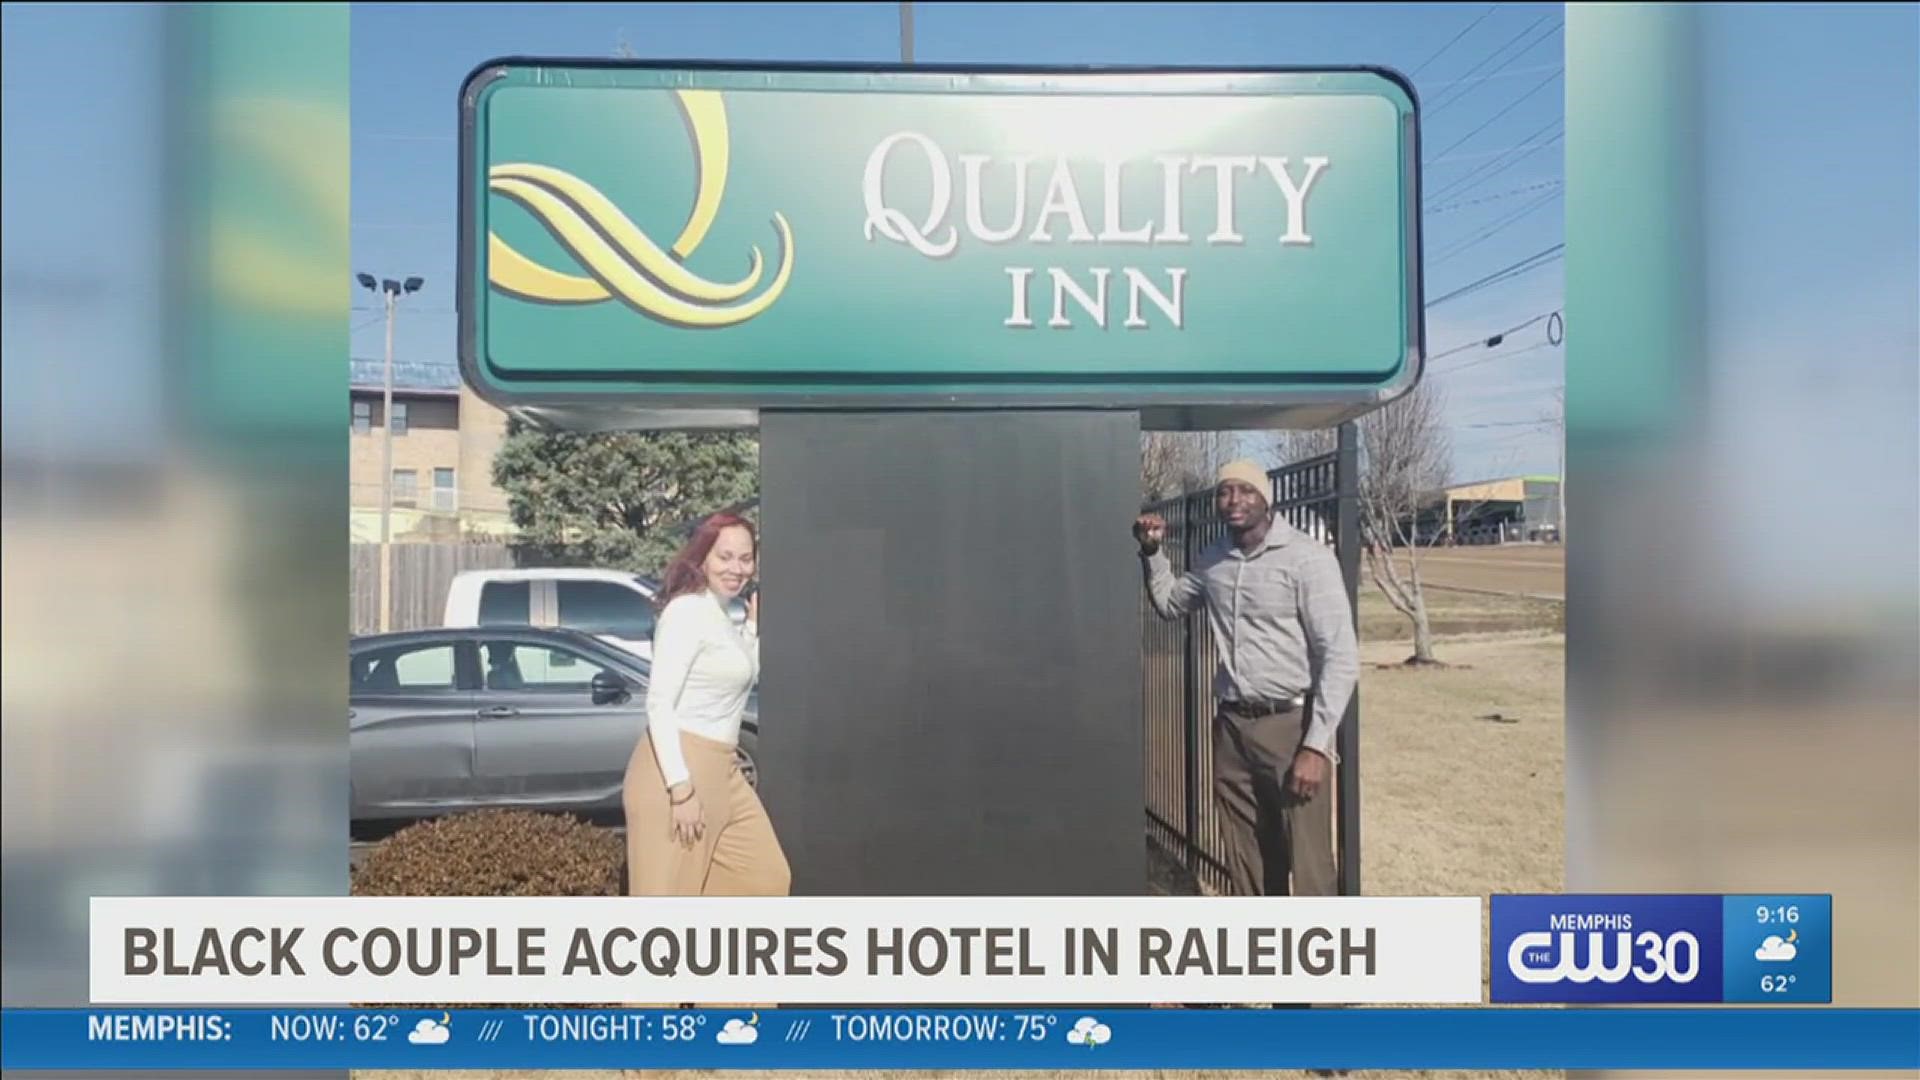 Norland and Amina James acquired a $3.8 million Quality Inn in the Raleigh neighborhood, following a rich history of Black hotel owners in Memphis.